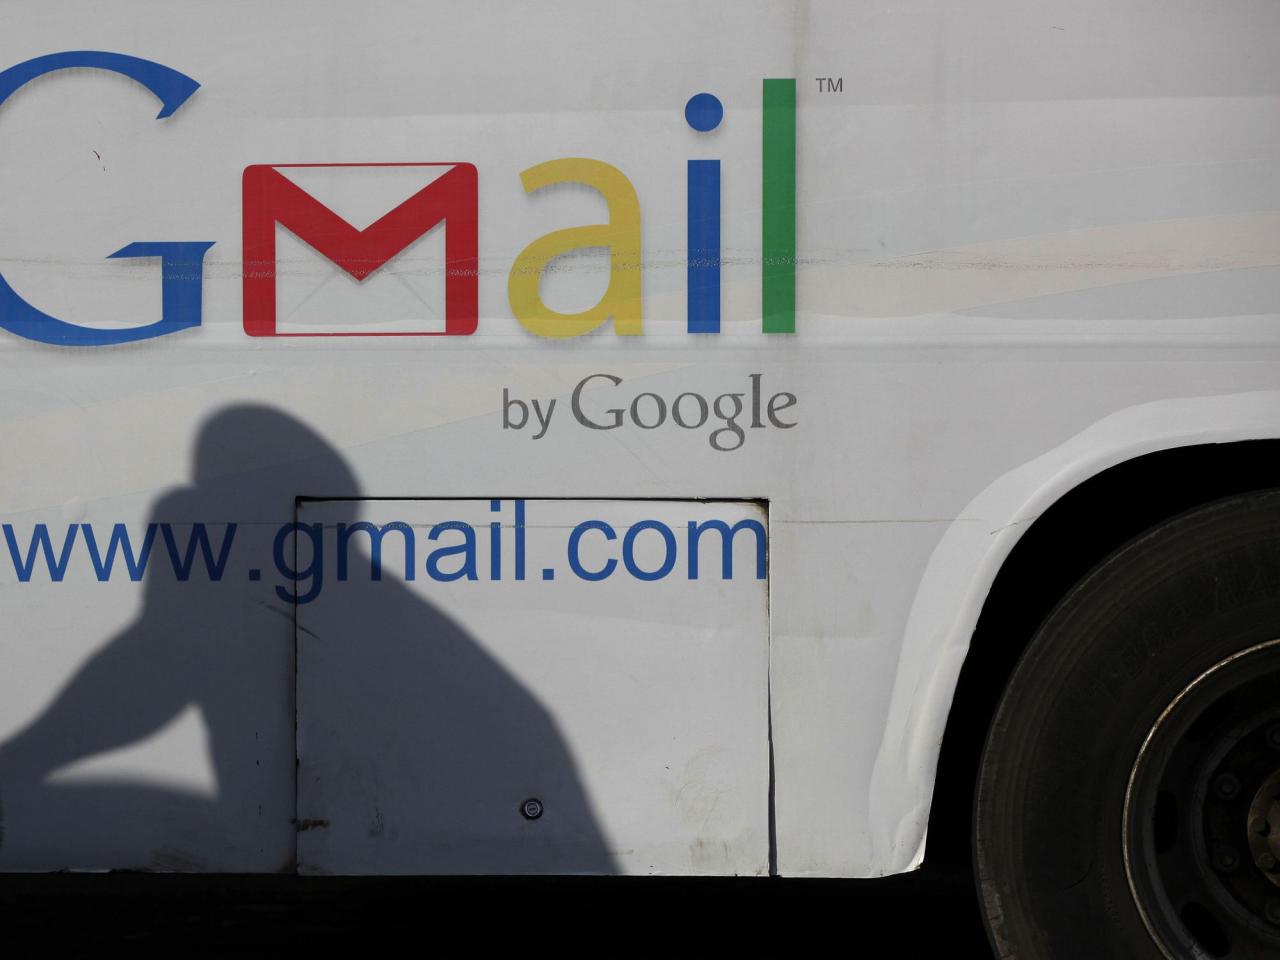 Gmail revolutionized email 20 years ago. People thought it was Google's April Fool's Day joke